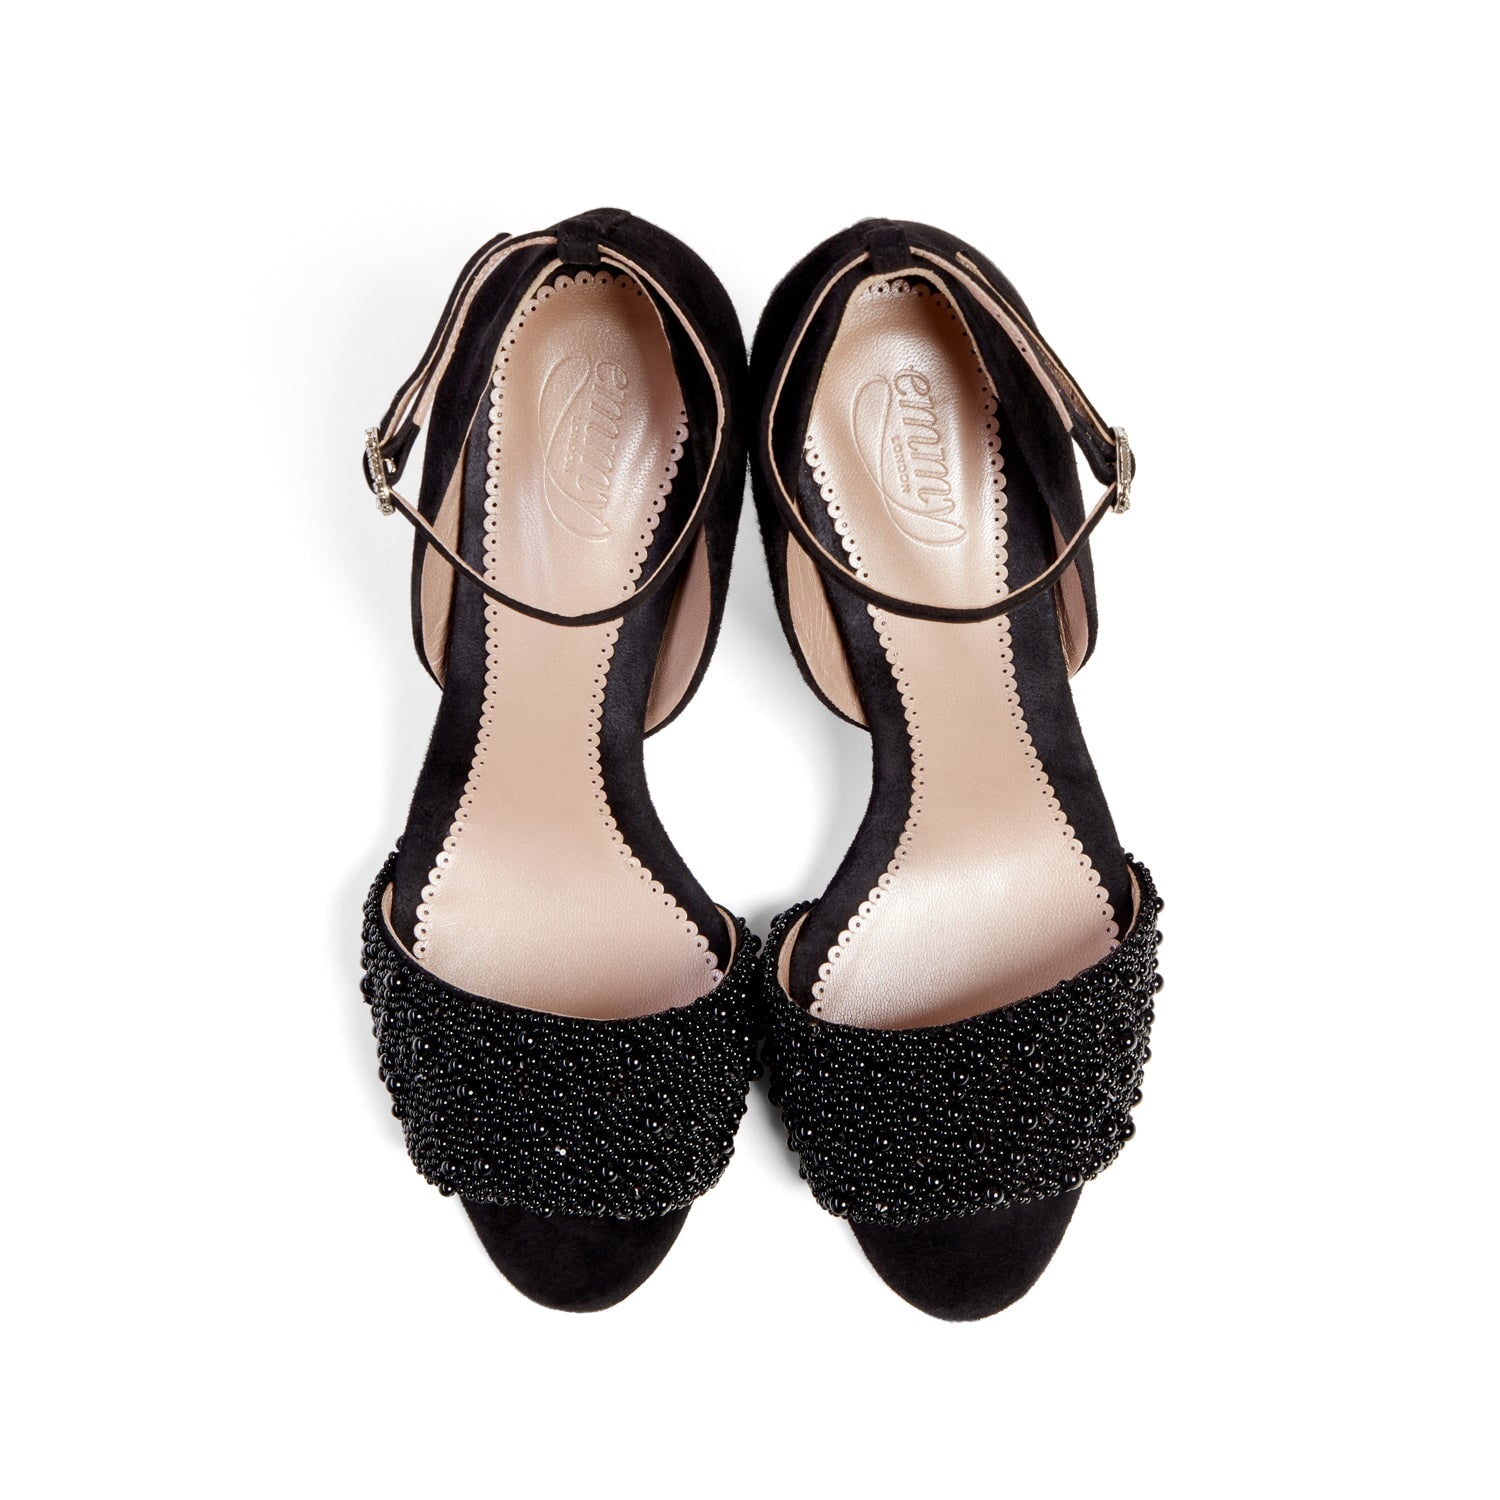 Daisy Jet Black Oyster Pearl Fashion Shoe Pearl Evening Shoe  image